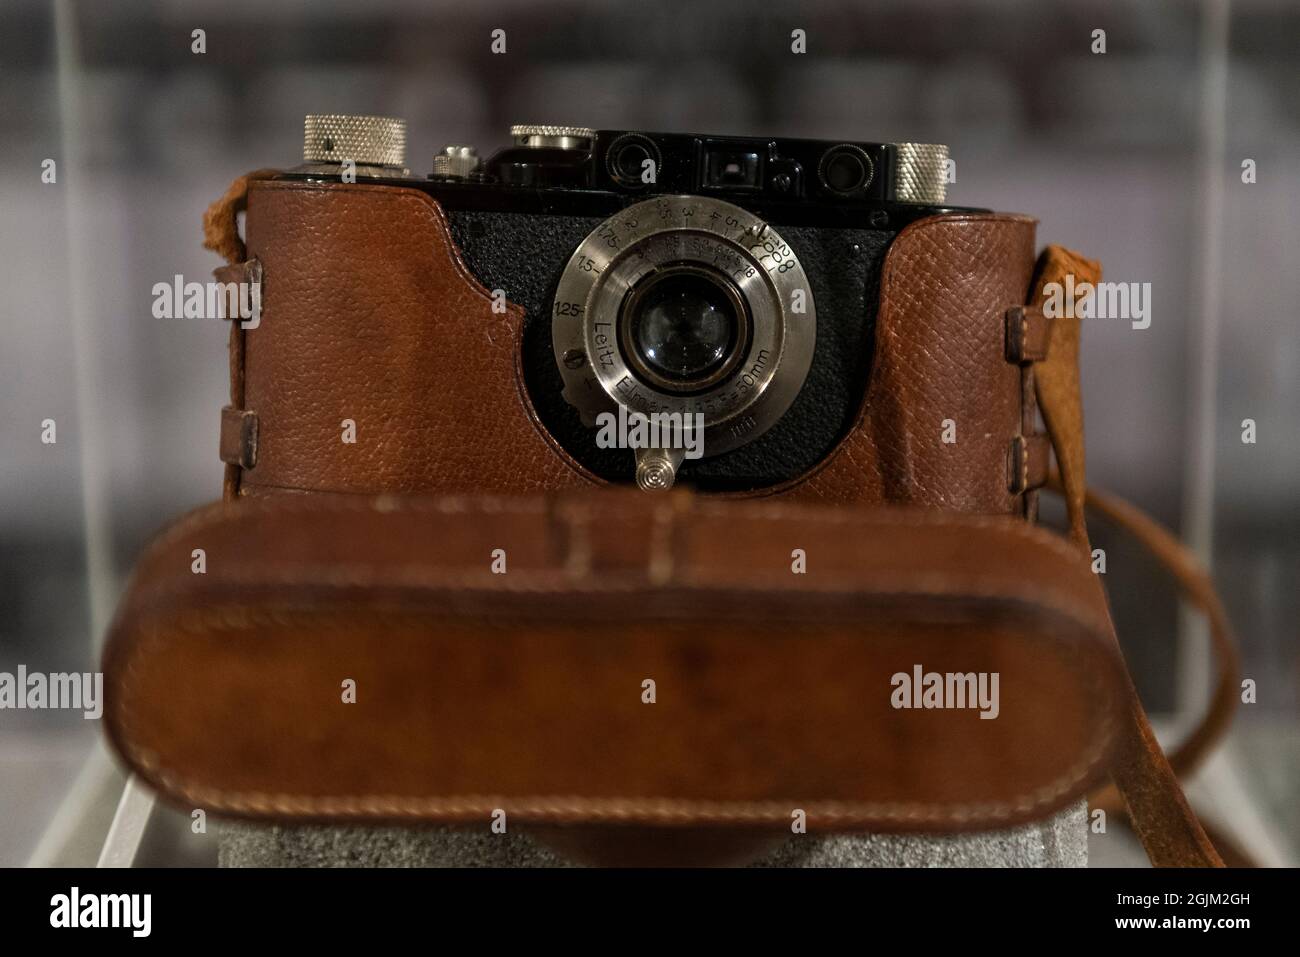 London, UK. 10 September 2021. War photographer, Robert Capa's first Leica  camera, a Leica II Mod. D c. 1930, on display at Photo London, now in its  sixth year. The show includes